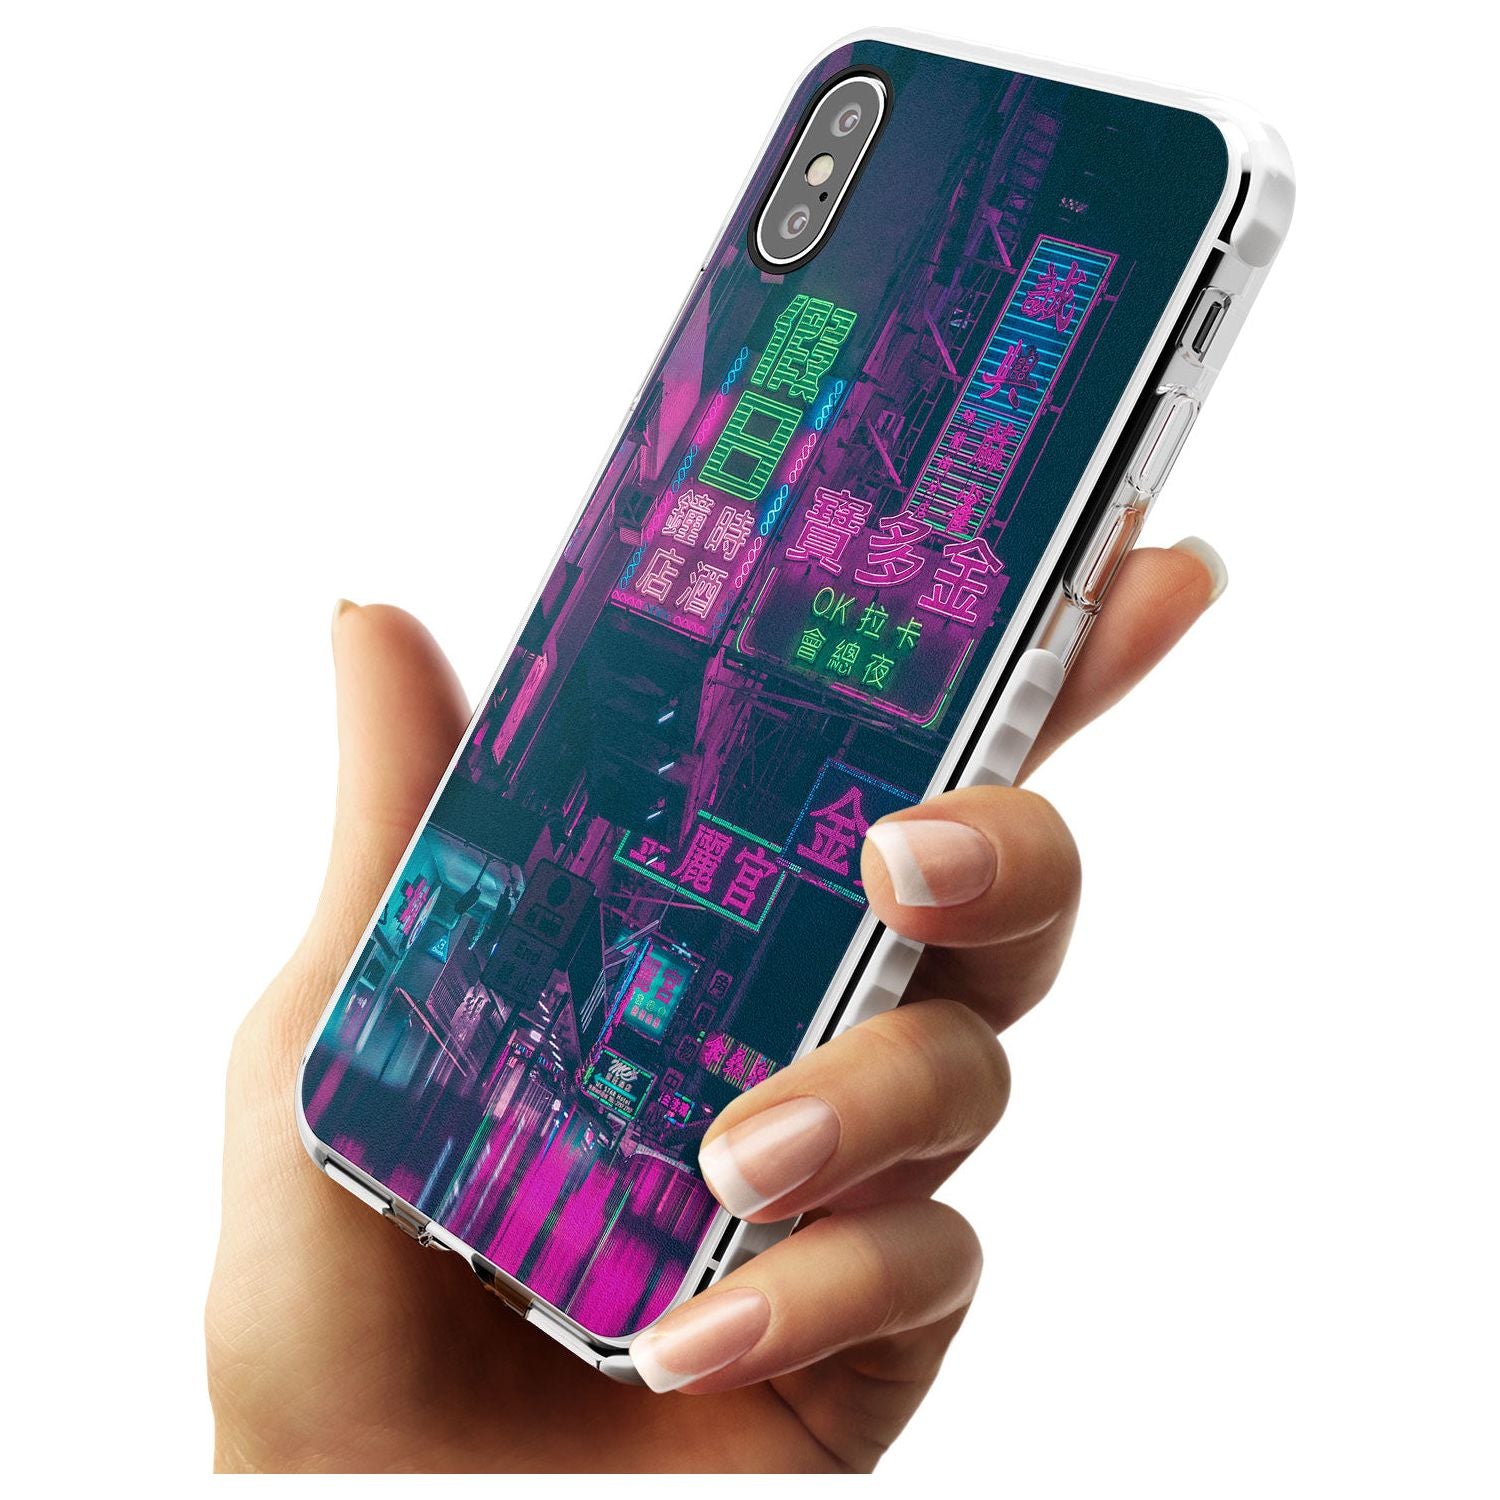 Rainy Reflections - Neon Cities Photographs Impact Phone Case for iPhone X XS Max XR